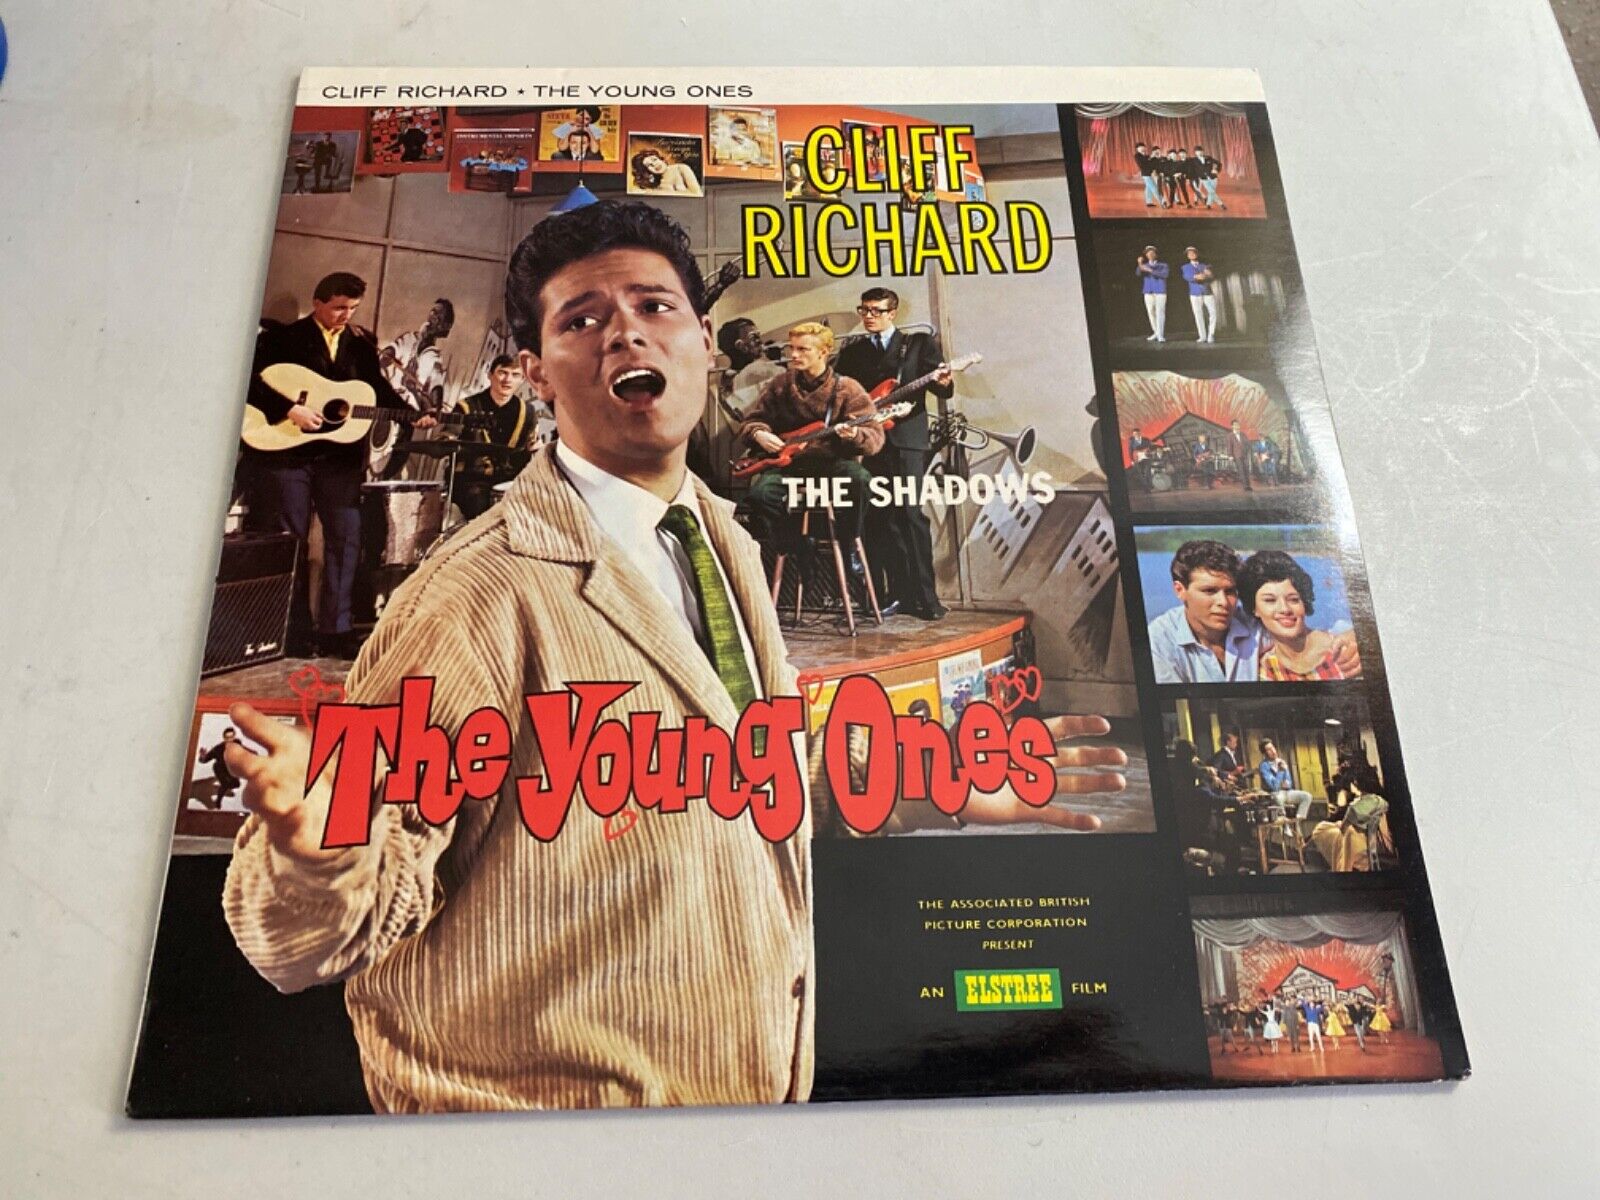 CLIFF RICHARD AND THE SHADOWS – THE YOUNG ONES VINYL LP RECORD ALBUM UK 1983 NM.